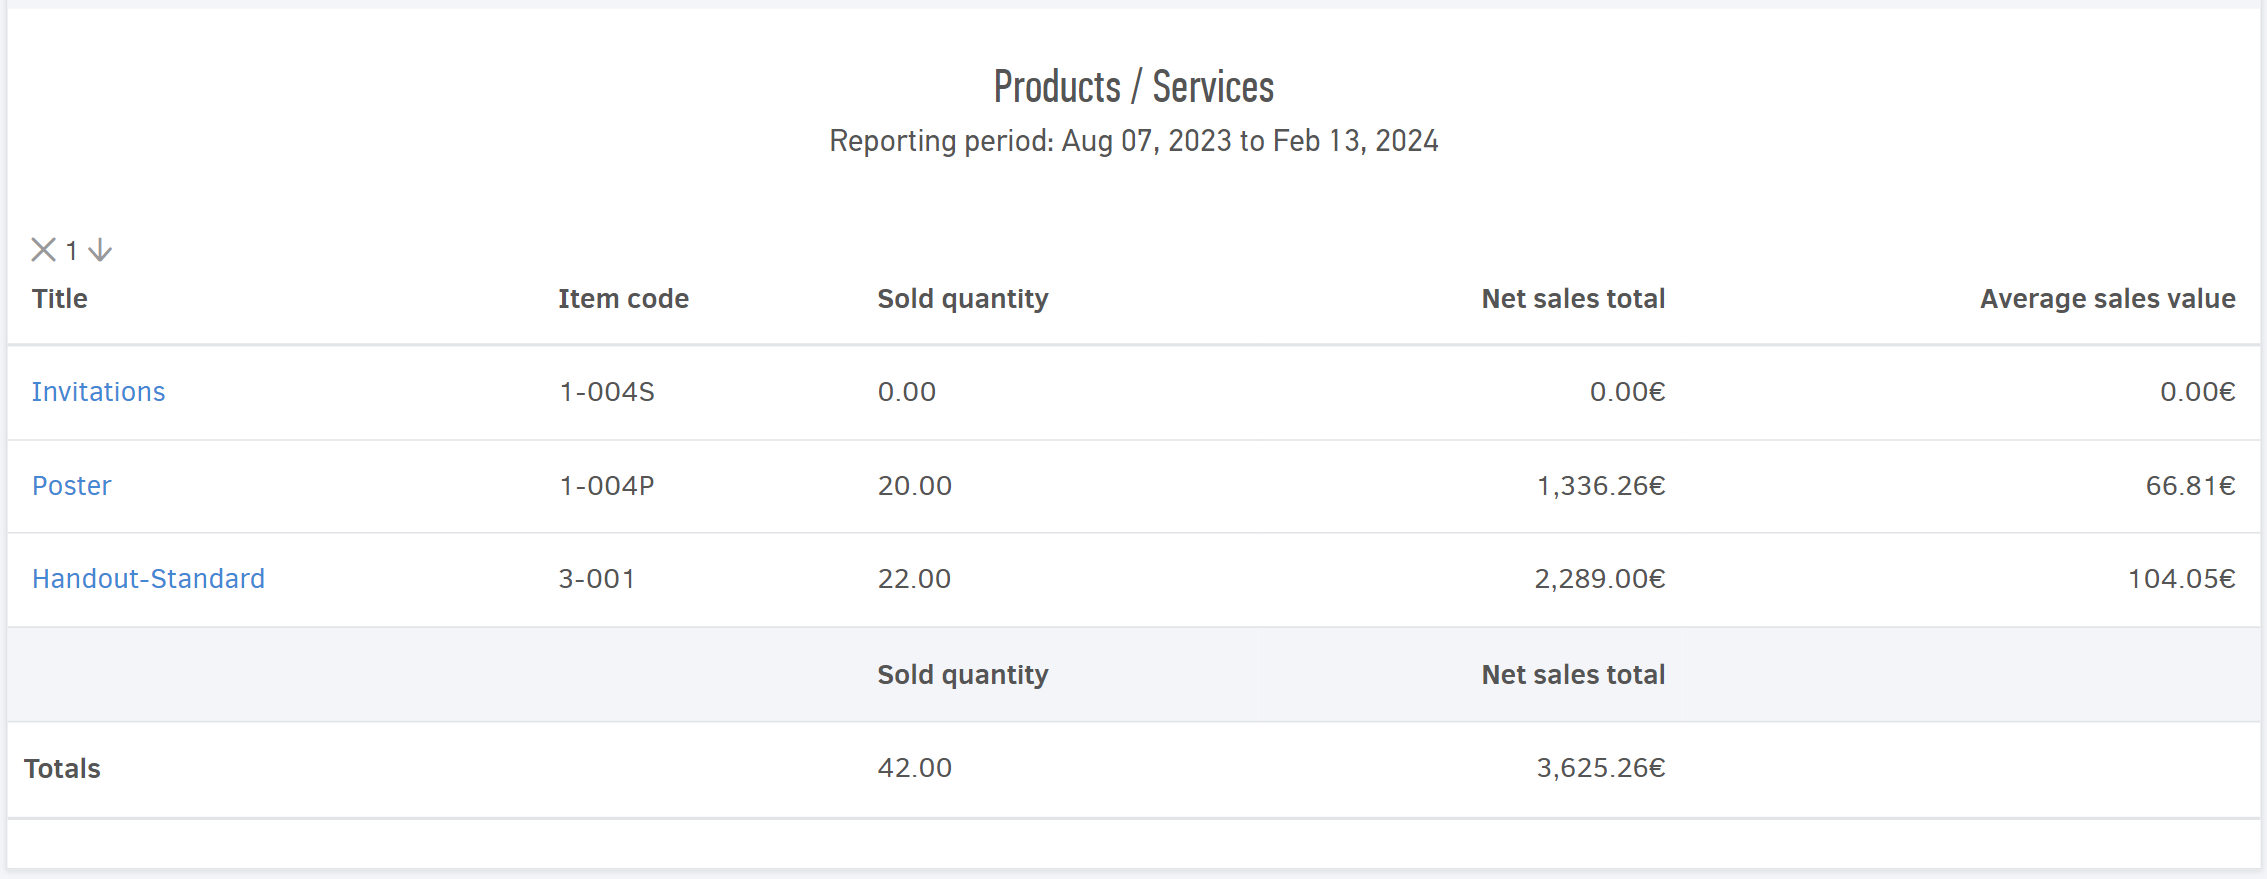 Sales report for Products/Services